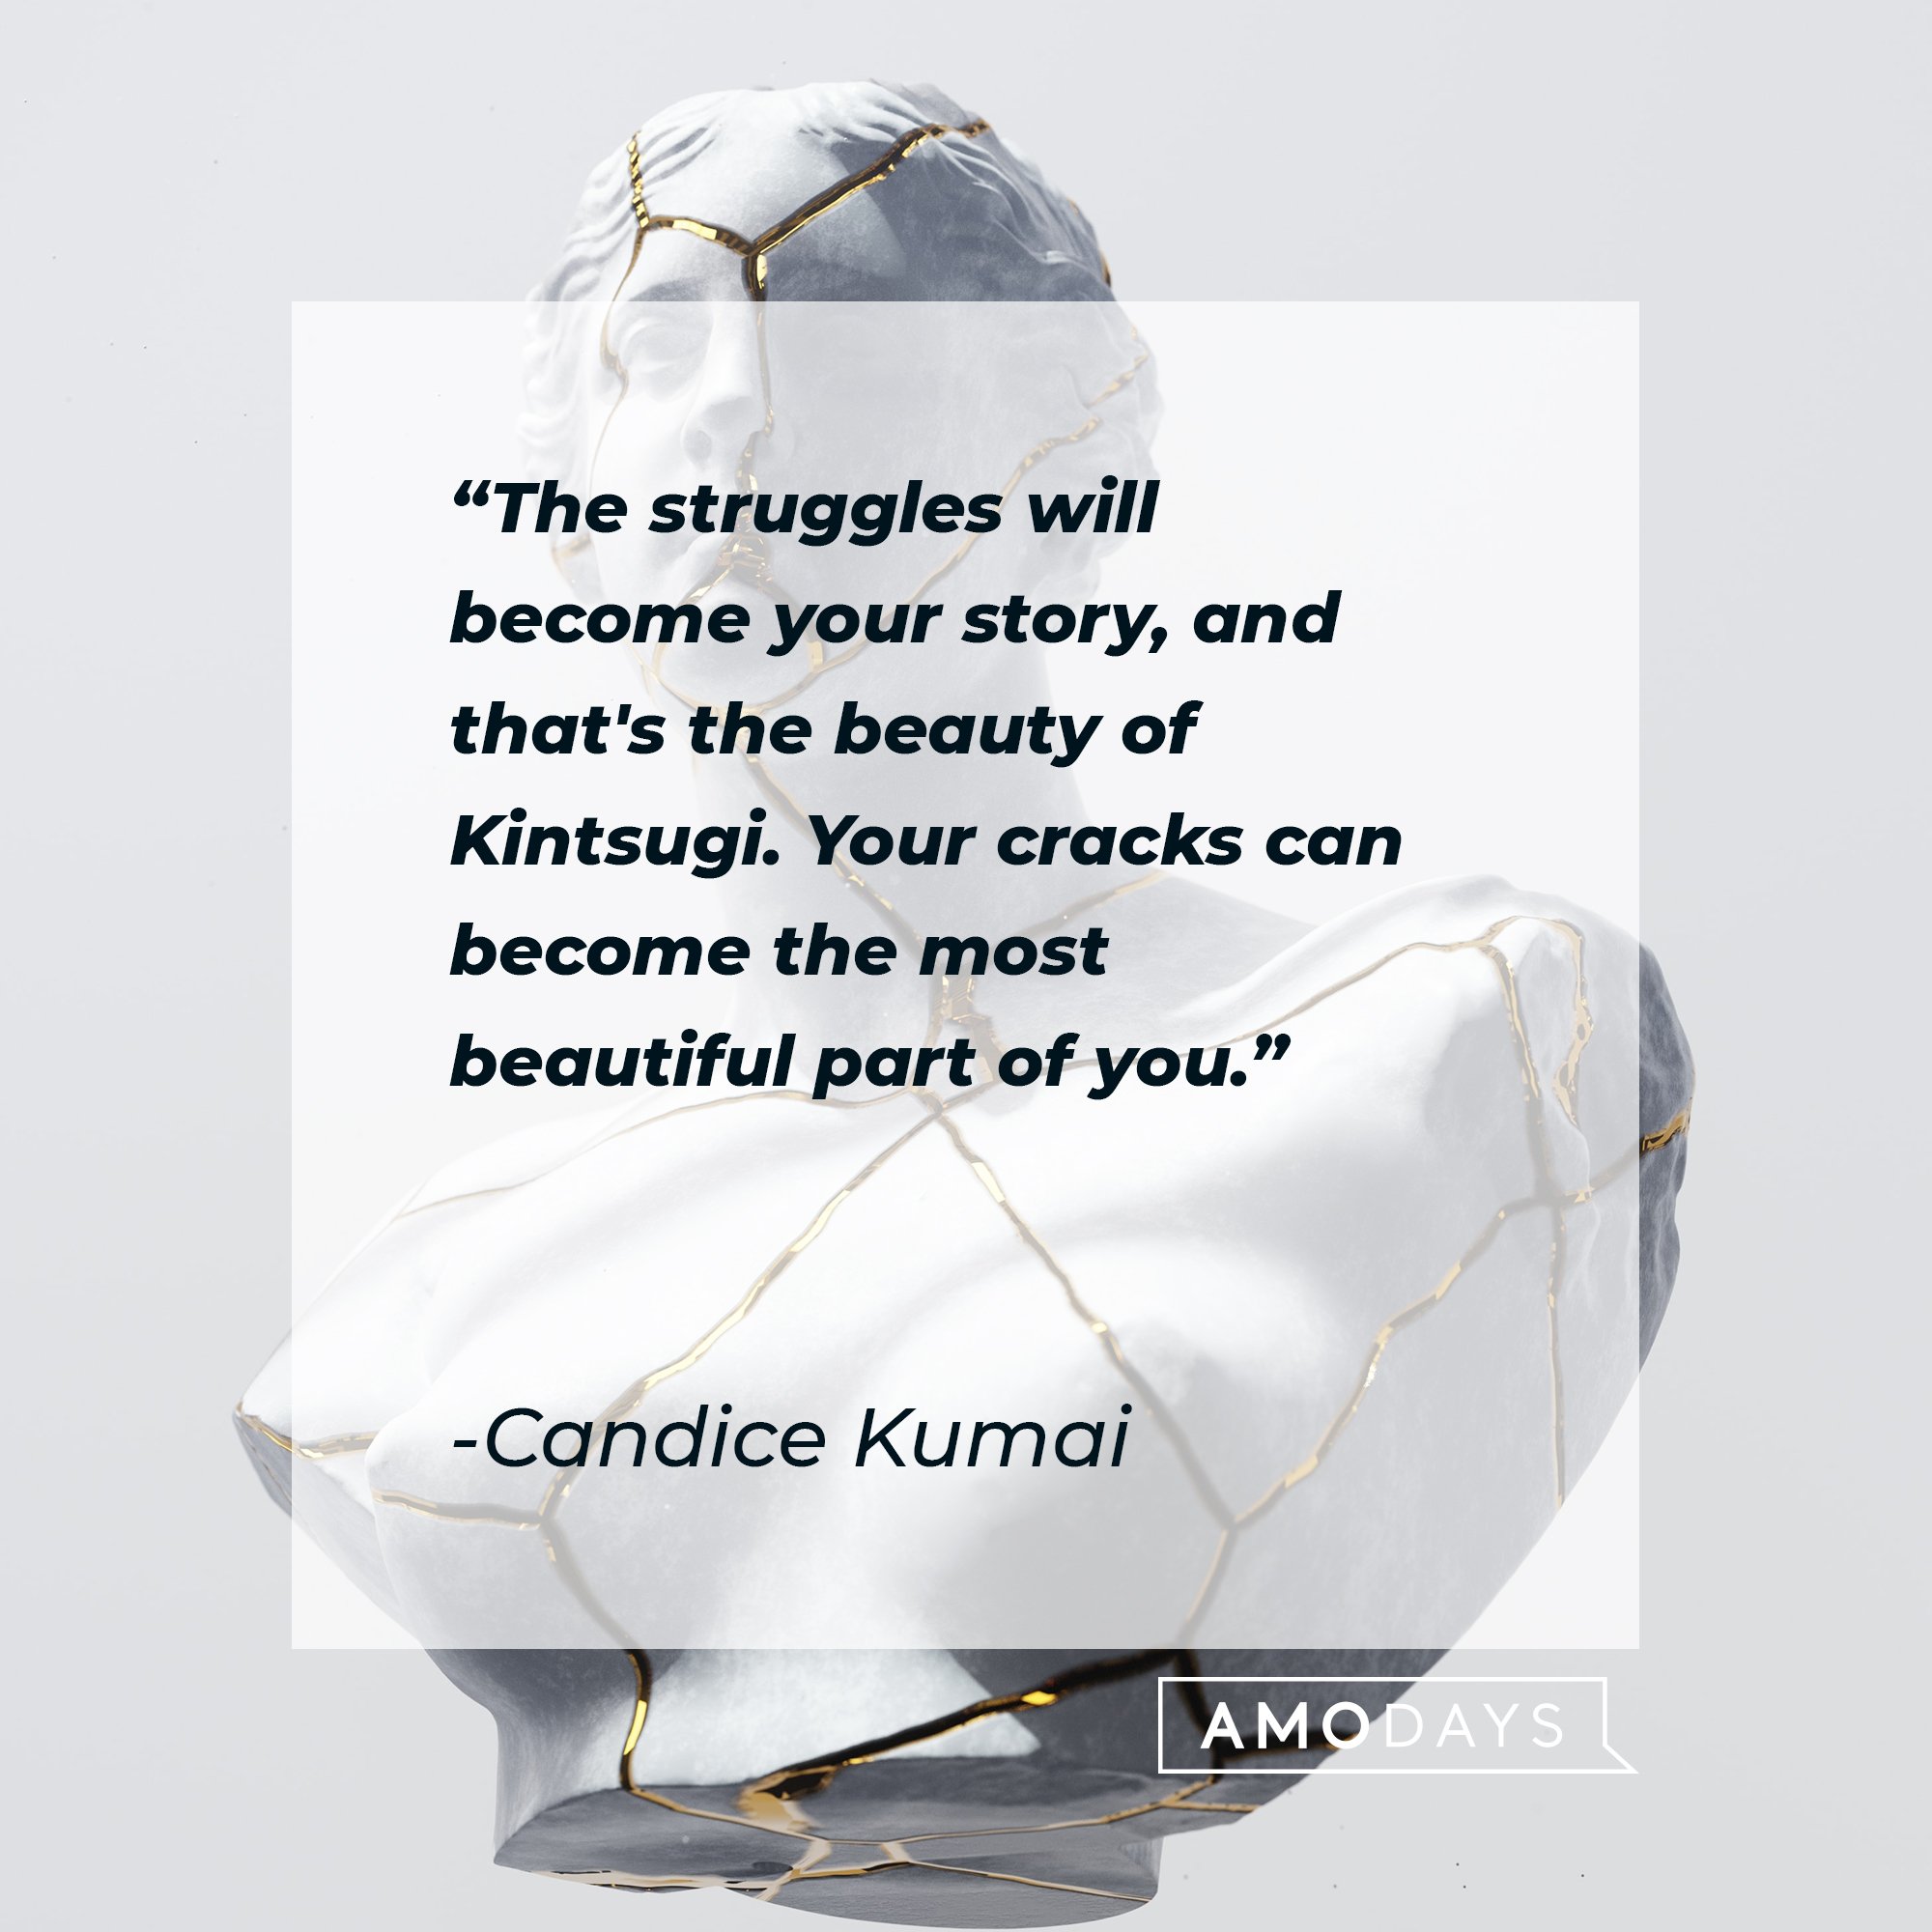 Candice Kumai’s quote: "The struggles will become your story, and that's the beauty of Kintsugi. Your cracks can become the most beautiful part of you." | Image: AmoDays